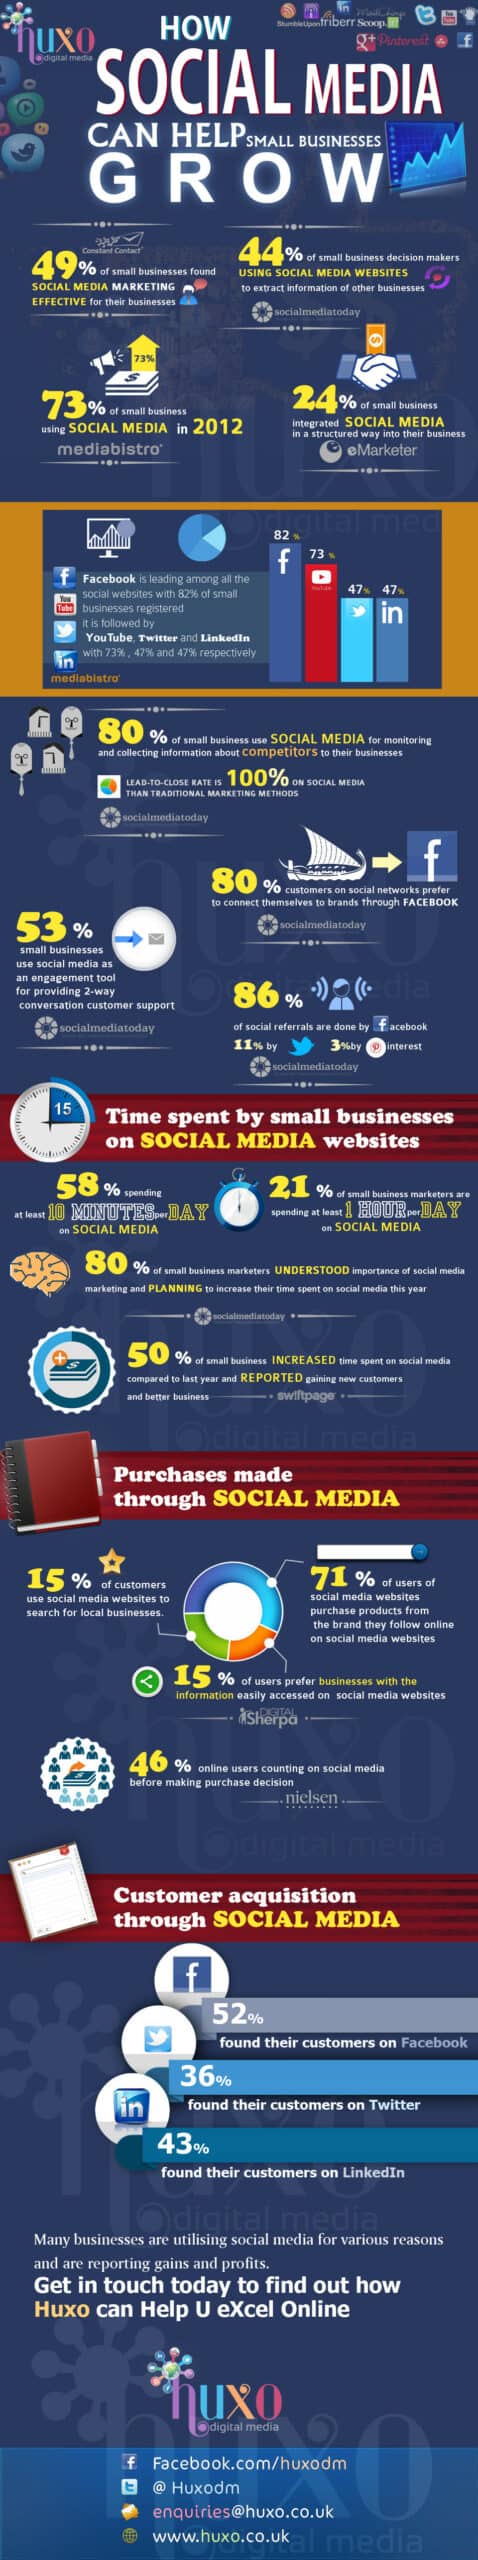 How Social Media Can Help Small Businesses Grow Infographic